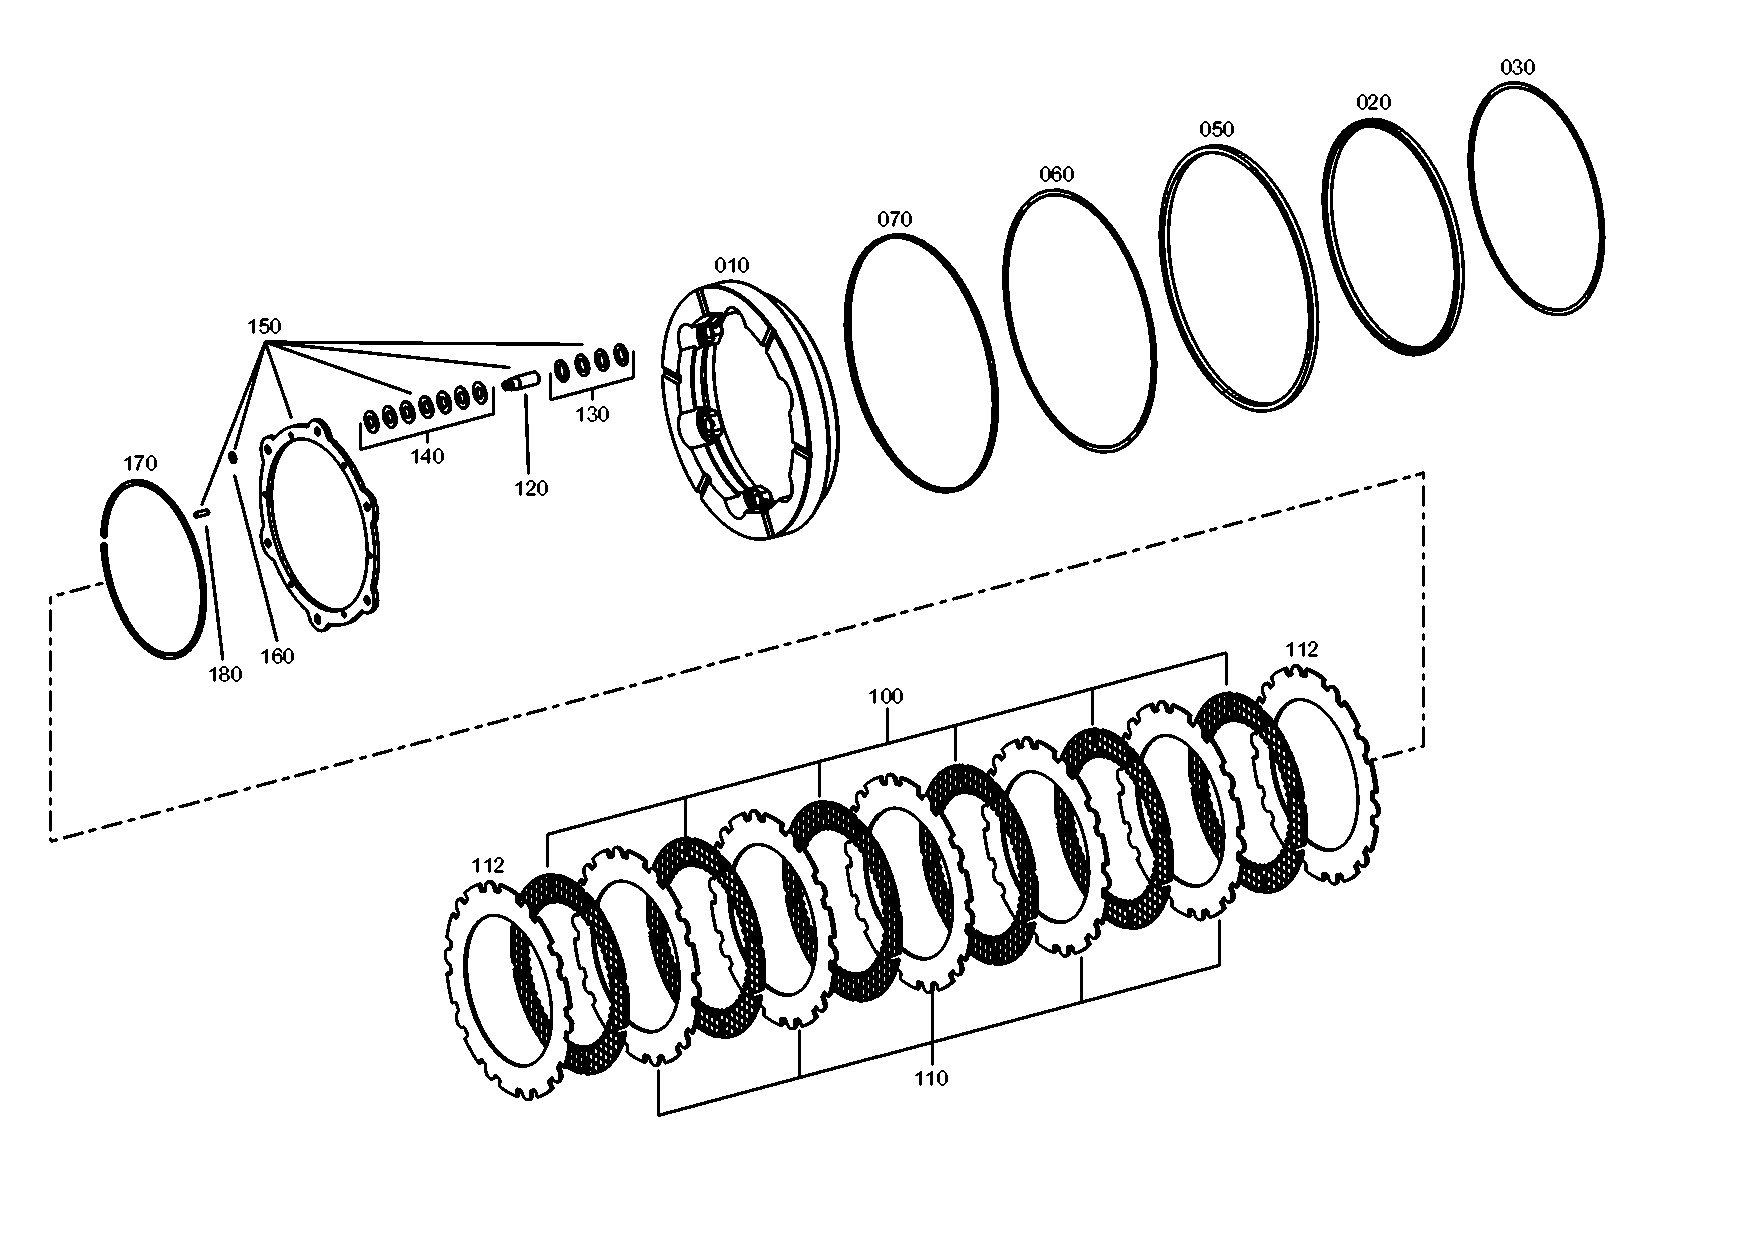 drawing for CNH NEW HOLLAND 8603584 - CUP SPRING (figure 3)